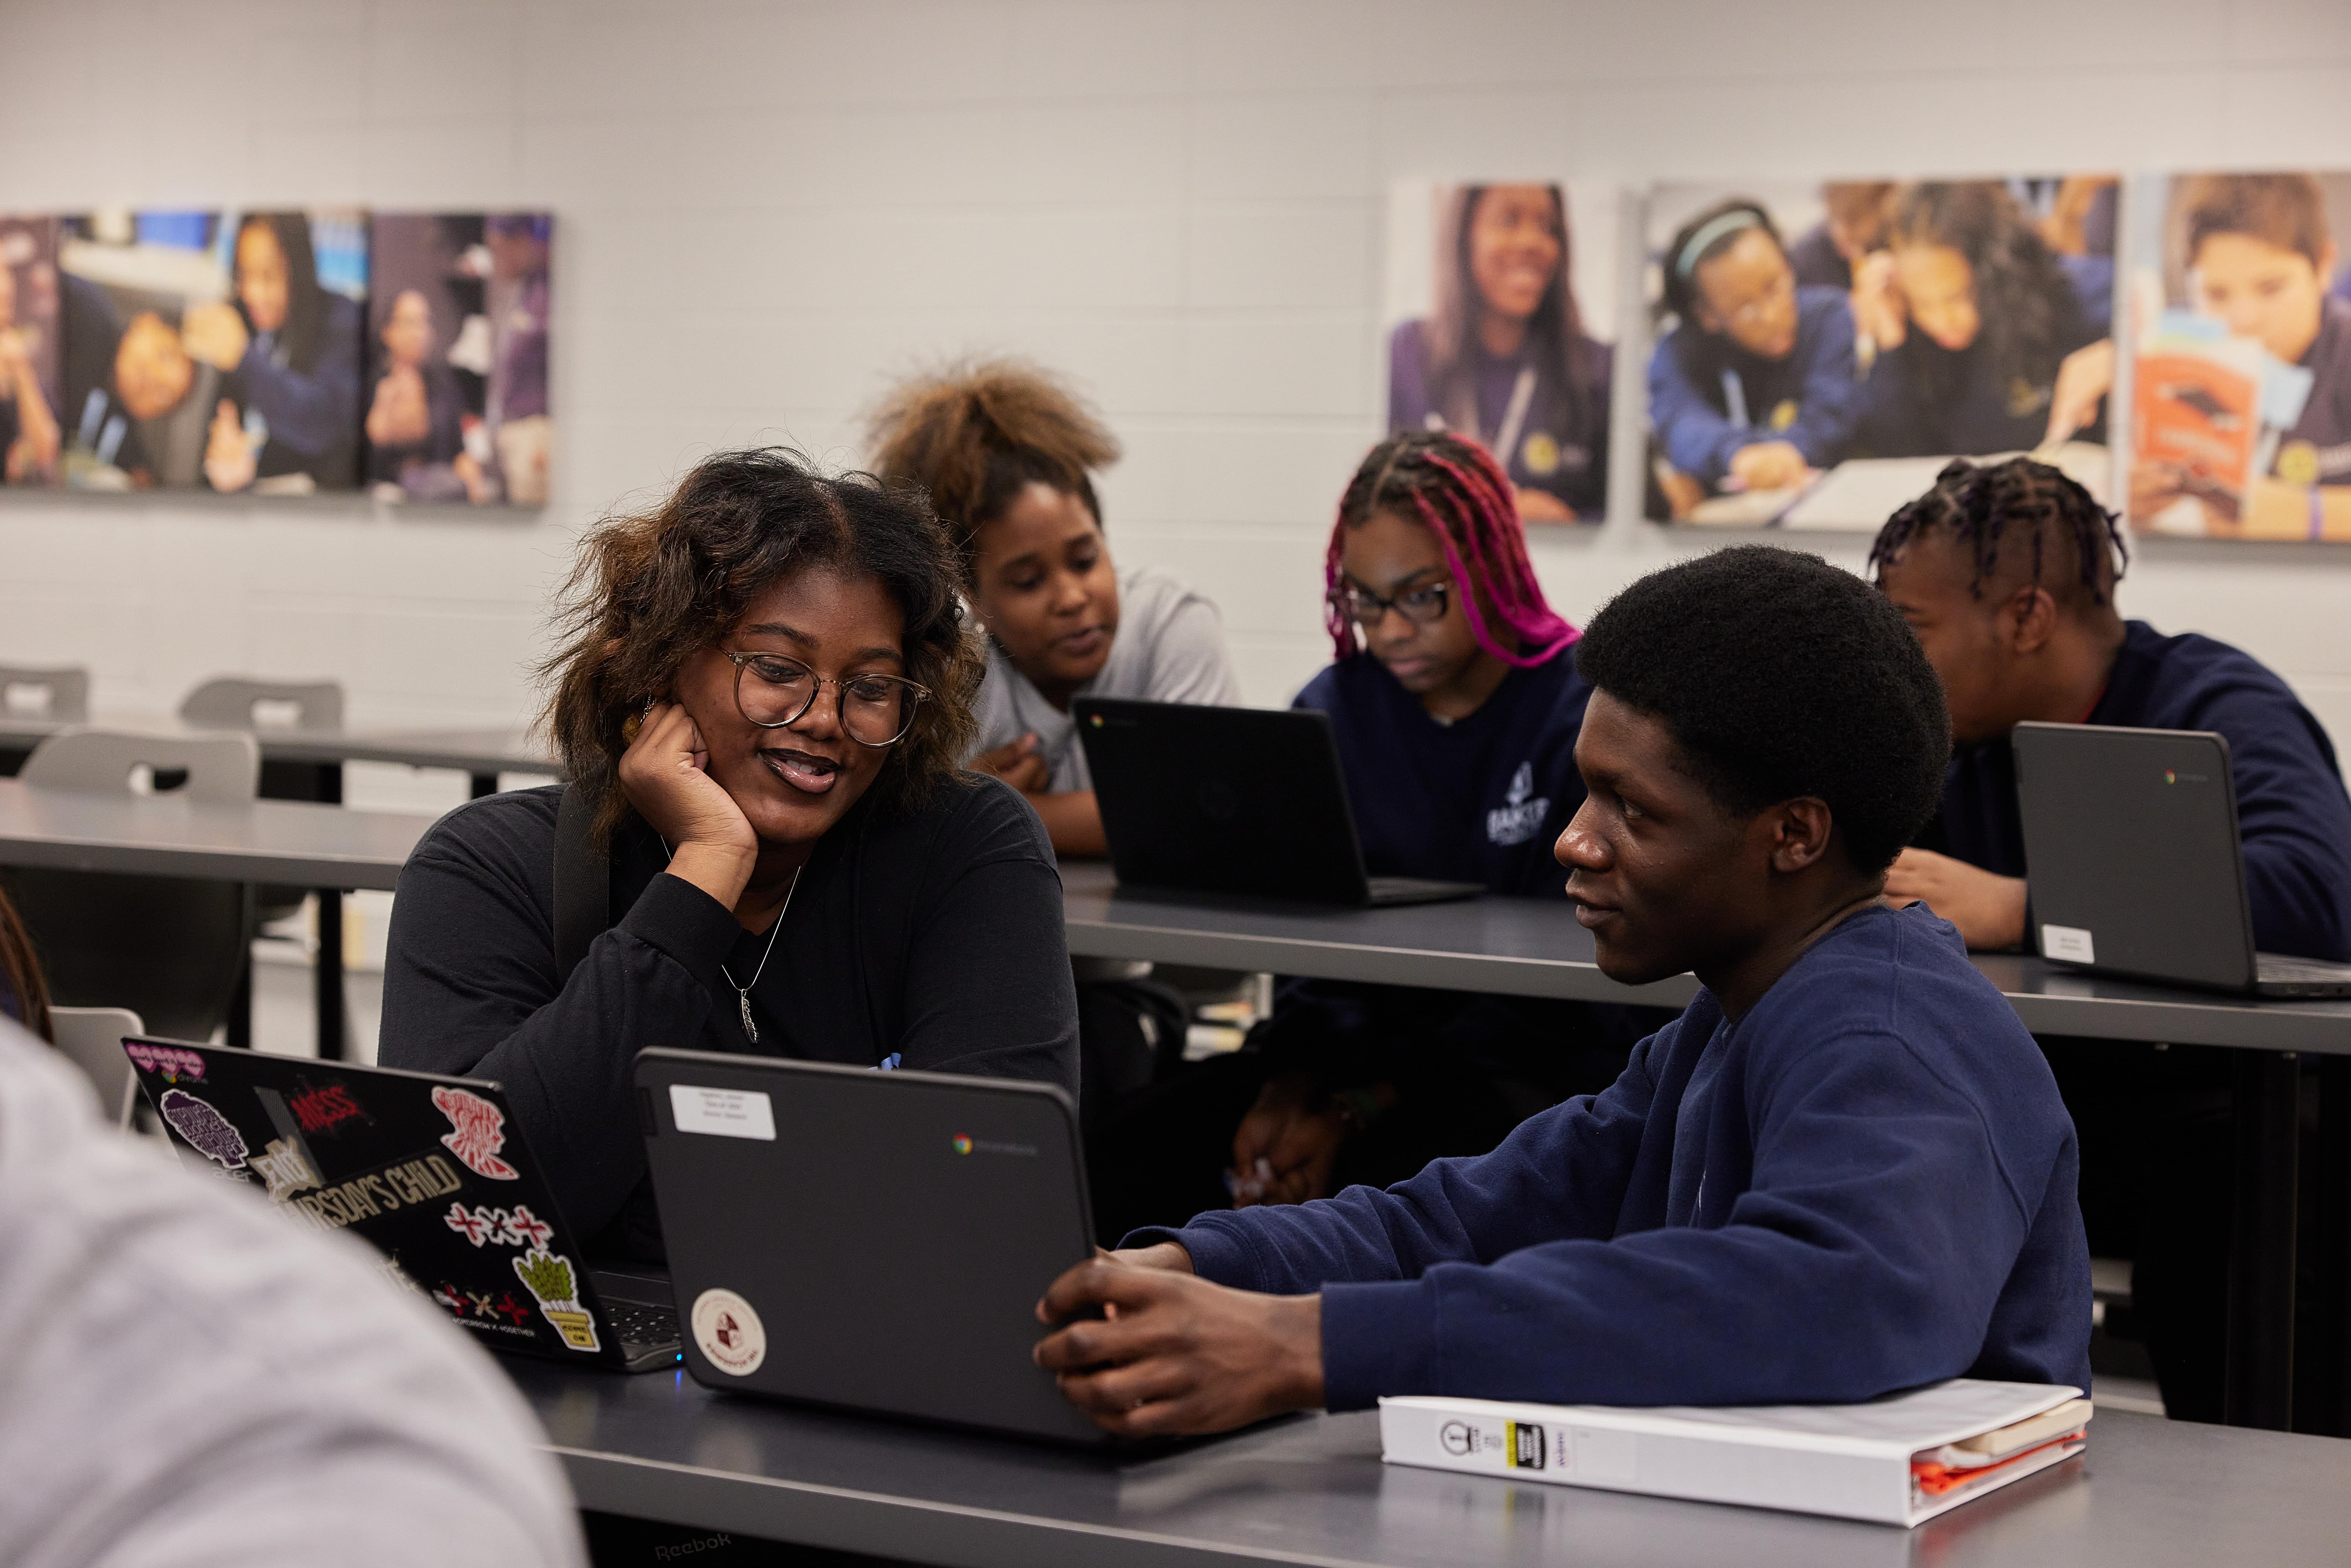 Baker College Prep students looking at their computer together